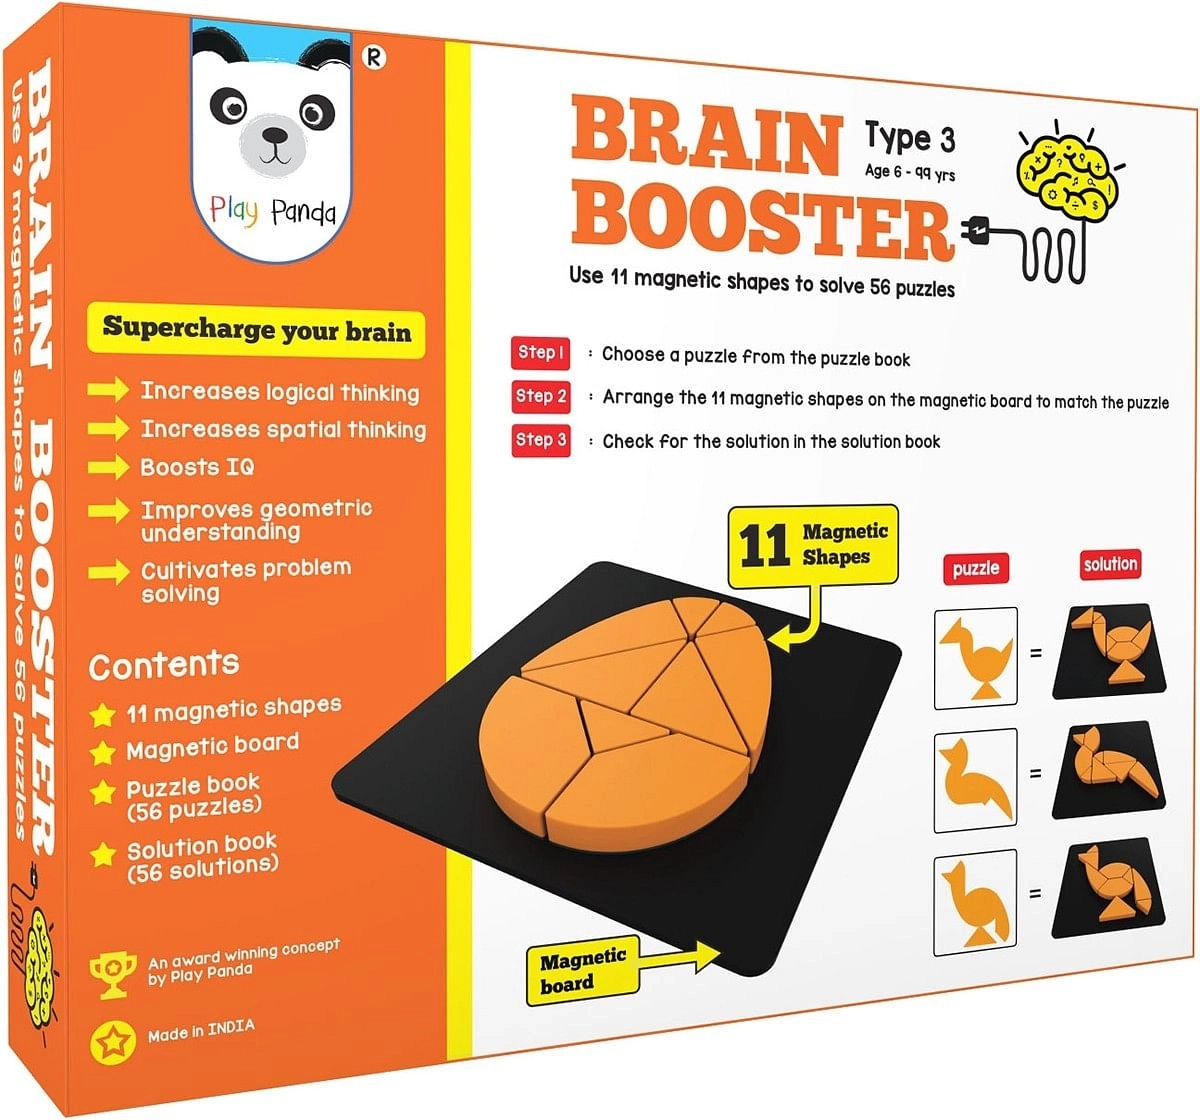 Play Panda Brain Booster Set 3 - 56 Puzzles Designed To Boost Intelligence - With Magnetic Shapes, Magnetic Board, Puzzle Book And Solution Book Puzzles for Kids Age 6Y+